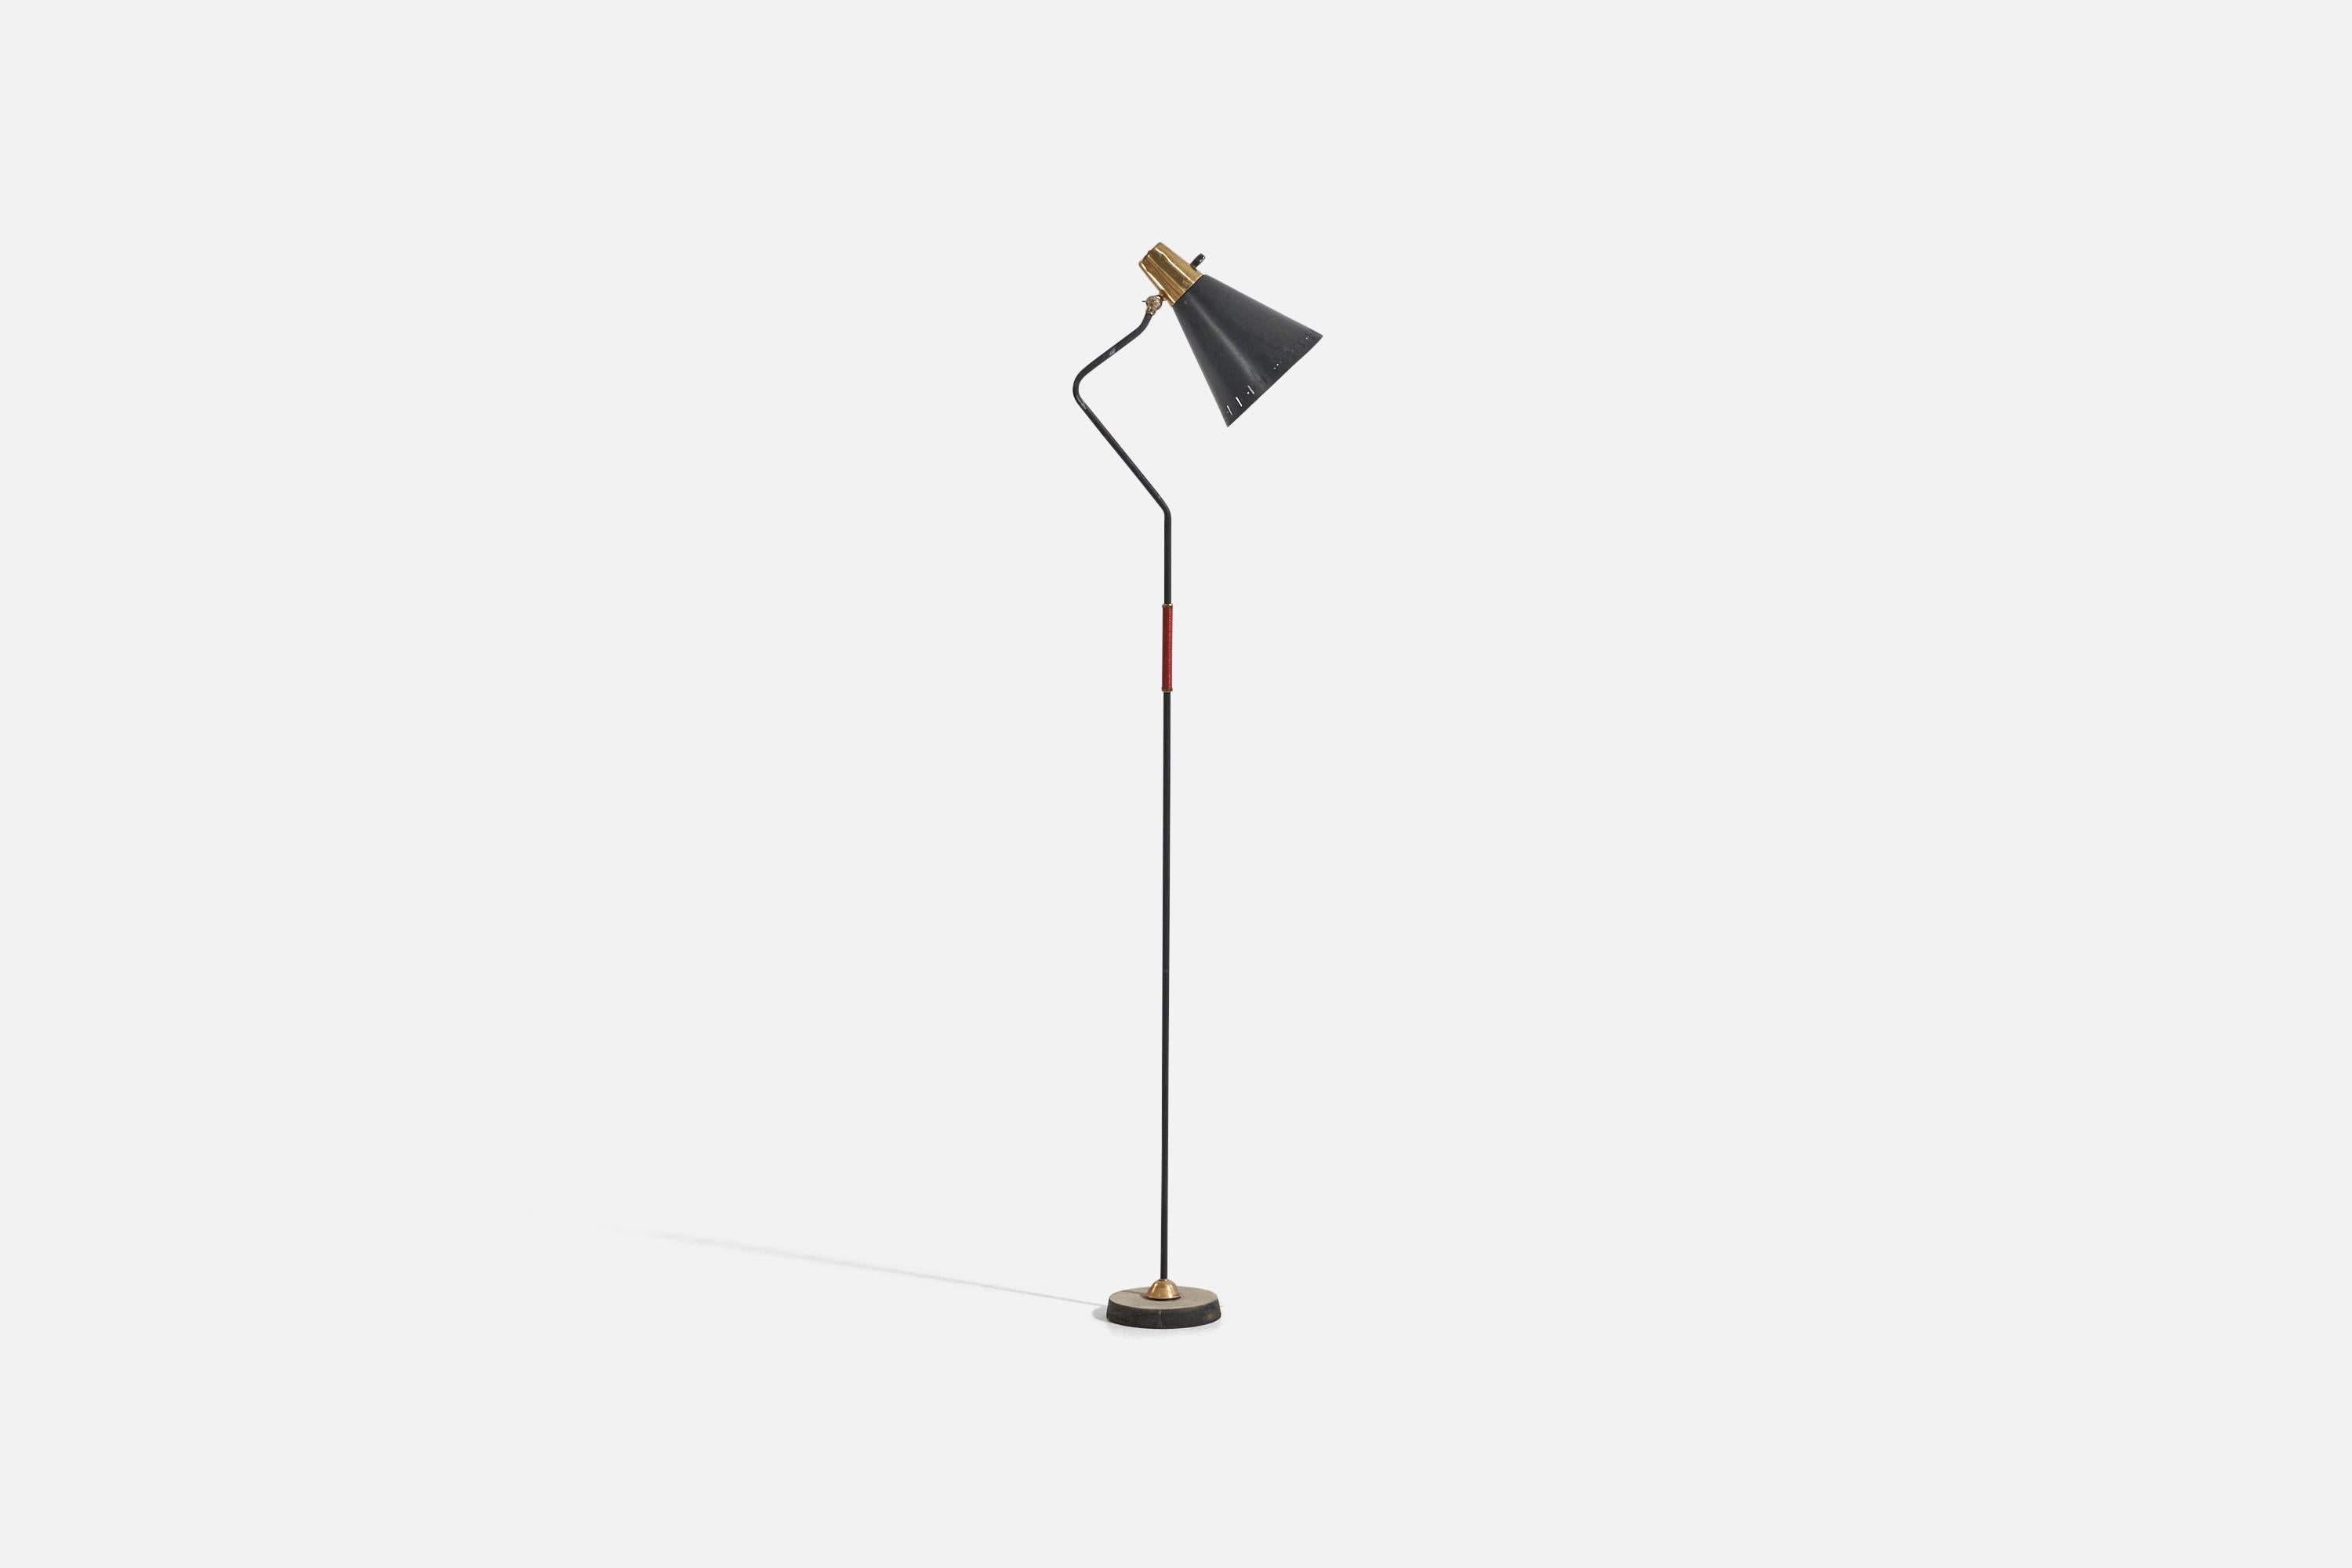 A metal, brass and leather floor lamp designed and produced by a Swedish designer, Sweden, 1960s. 

Dimensions variable, measured as illustrated in first image.

Socket takes standard E-26 medium base bulb.

There is no maximum wattage stated